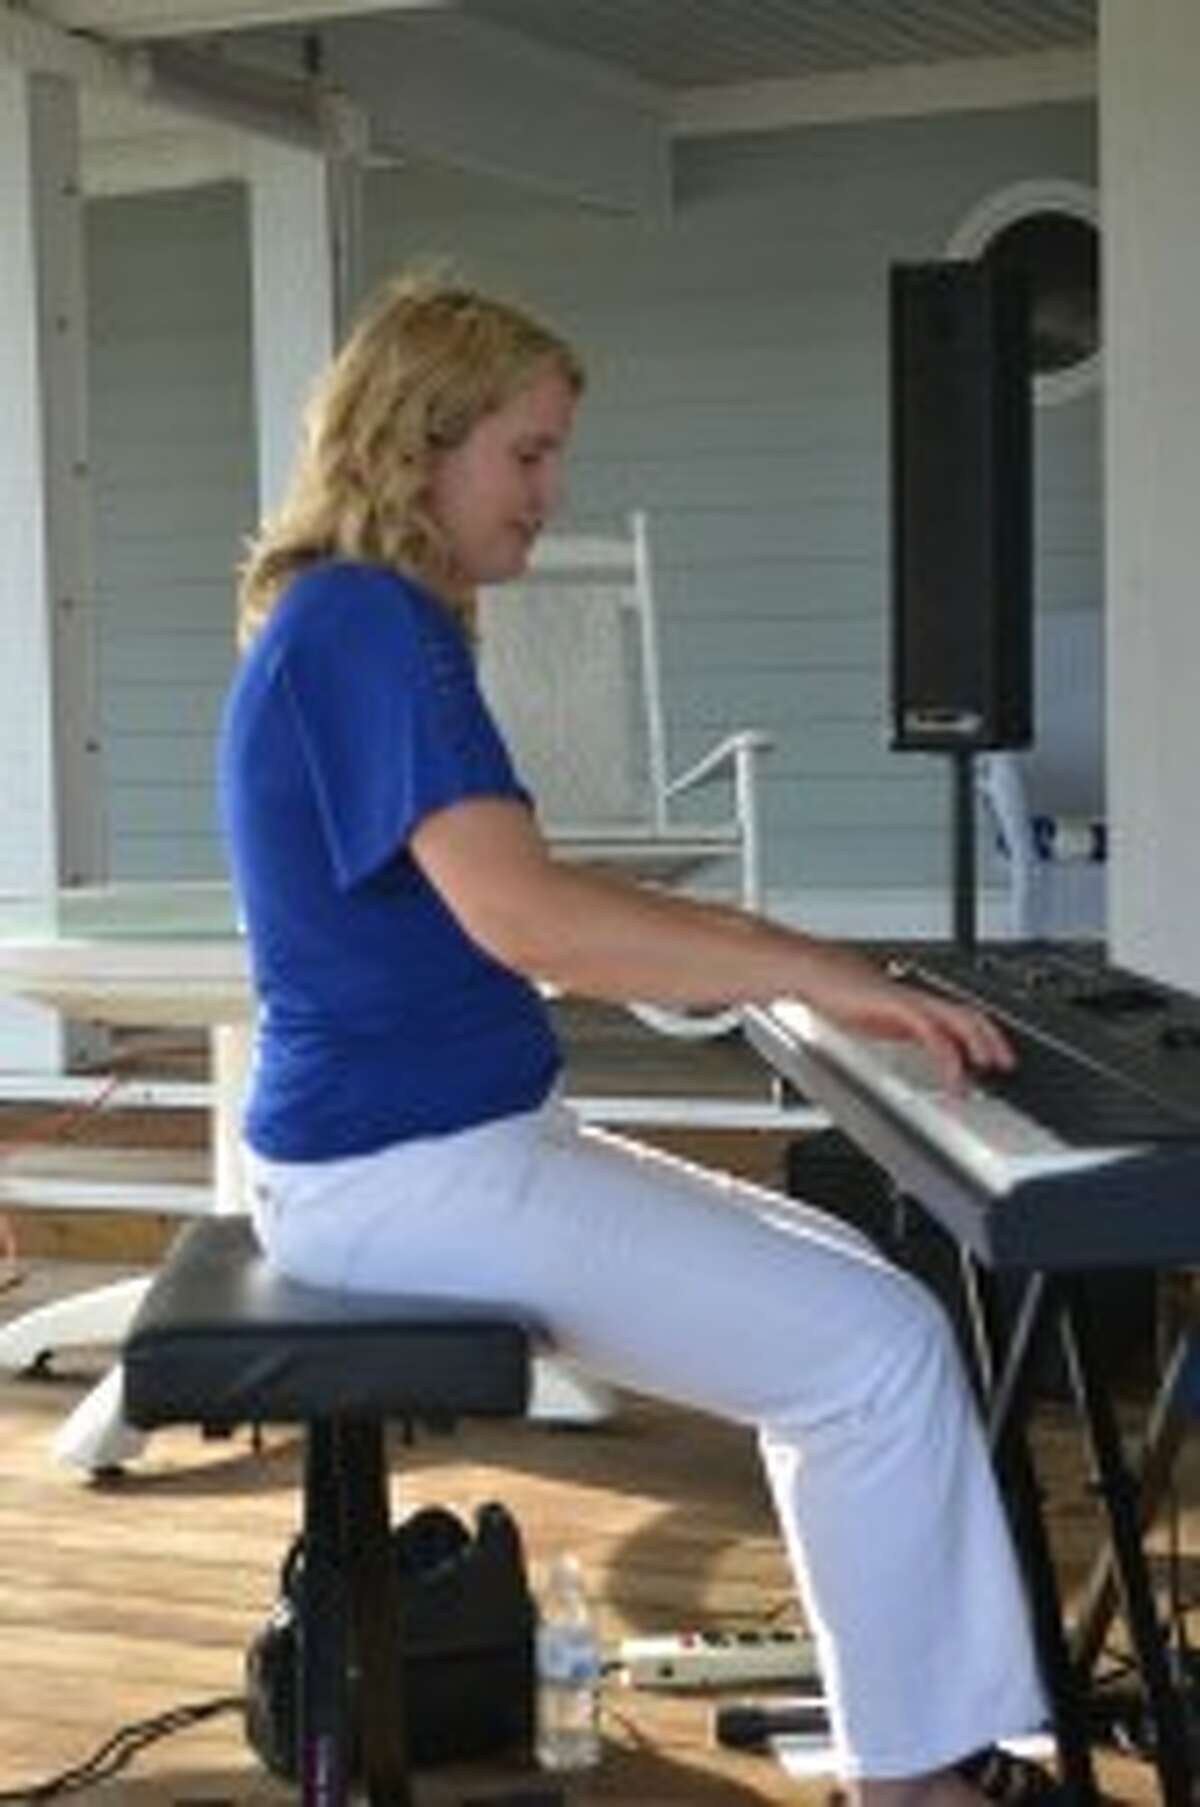 Carrie Selbee, of Manistee, entertains guests on the piano at a Manistee Community Kitchen fundraiser at Seng's Marina on Saturday. (Meg LeDuc/News Advocate)